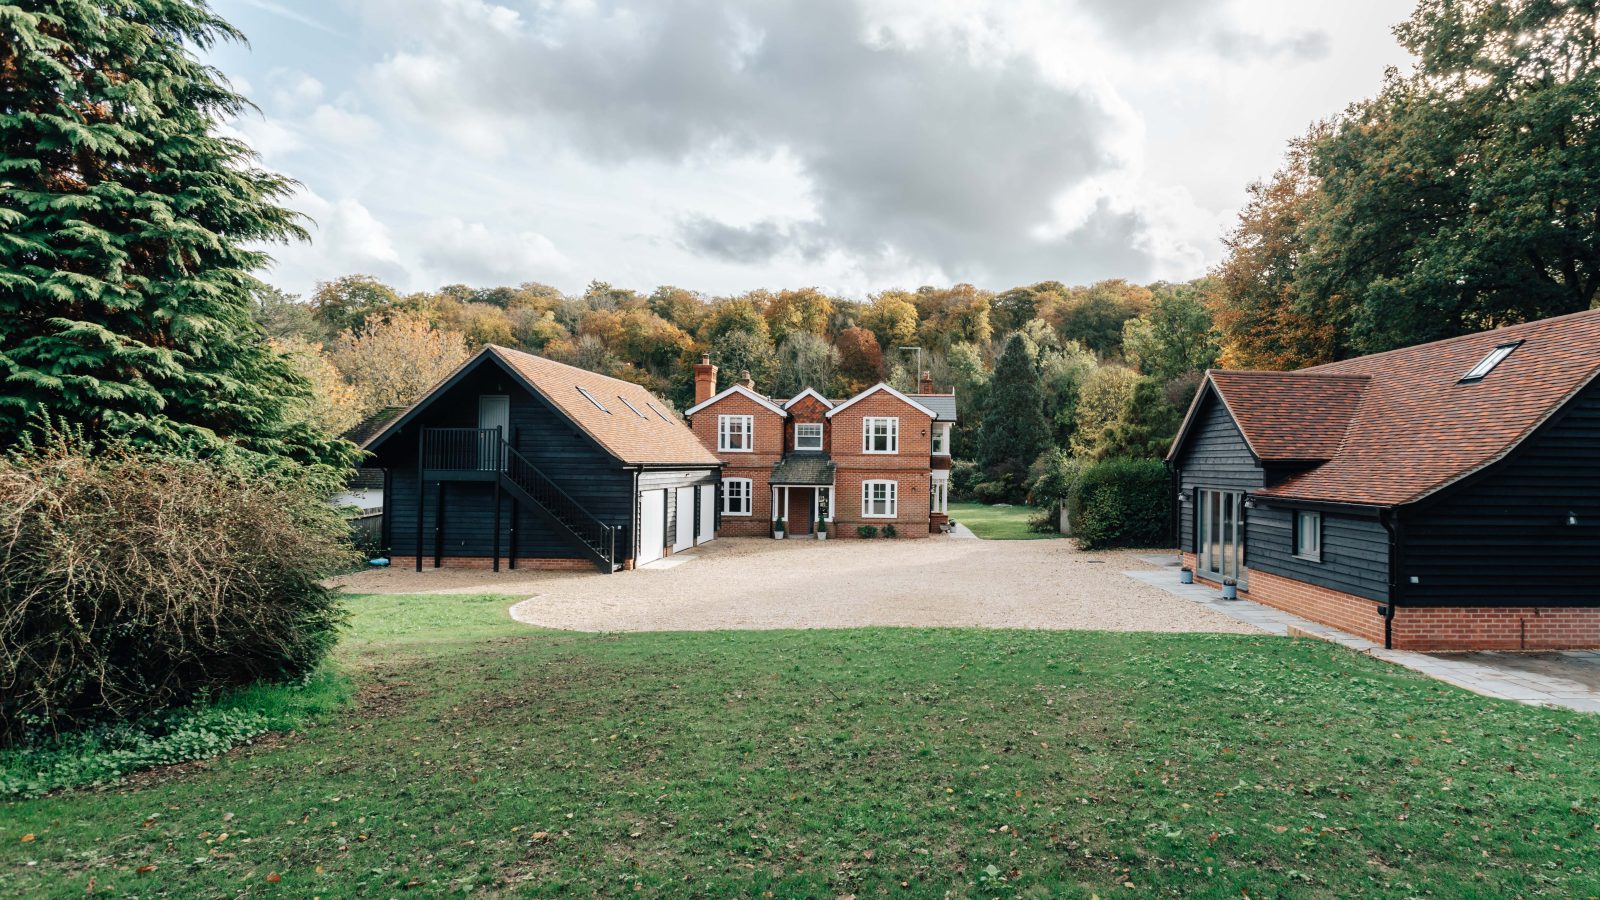 Chalk Hill House - kate & tom's Large Holiday Homes